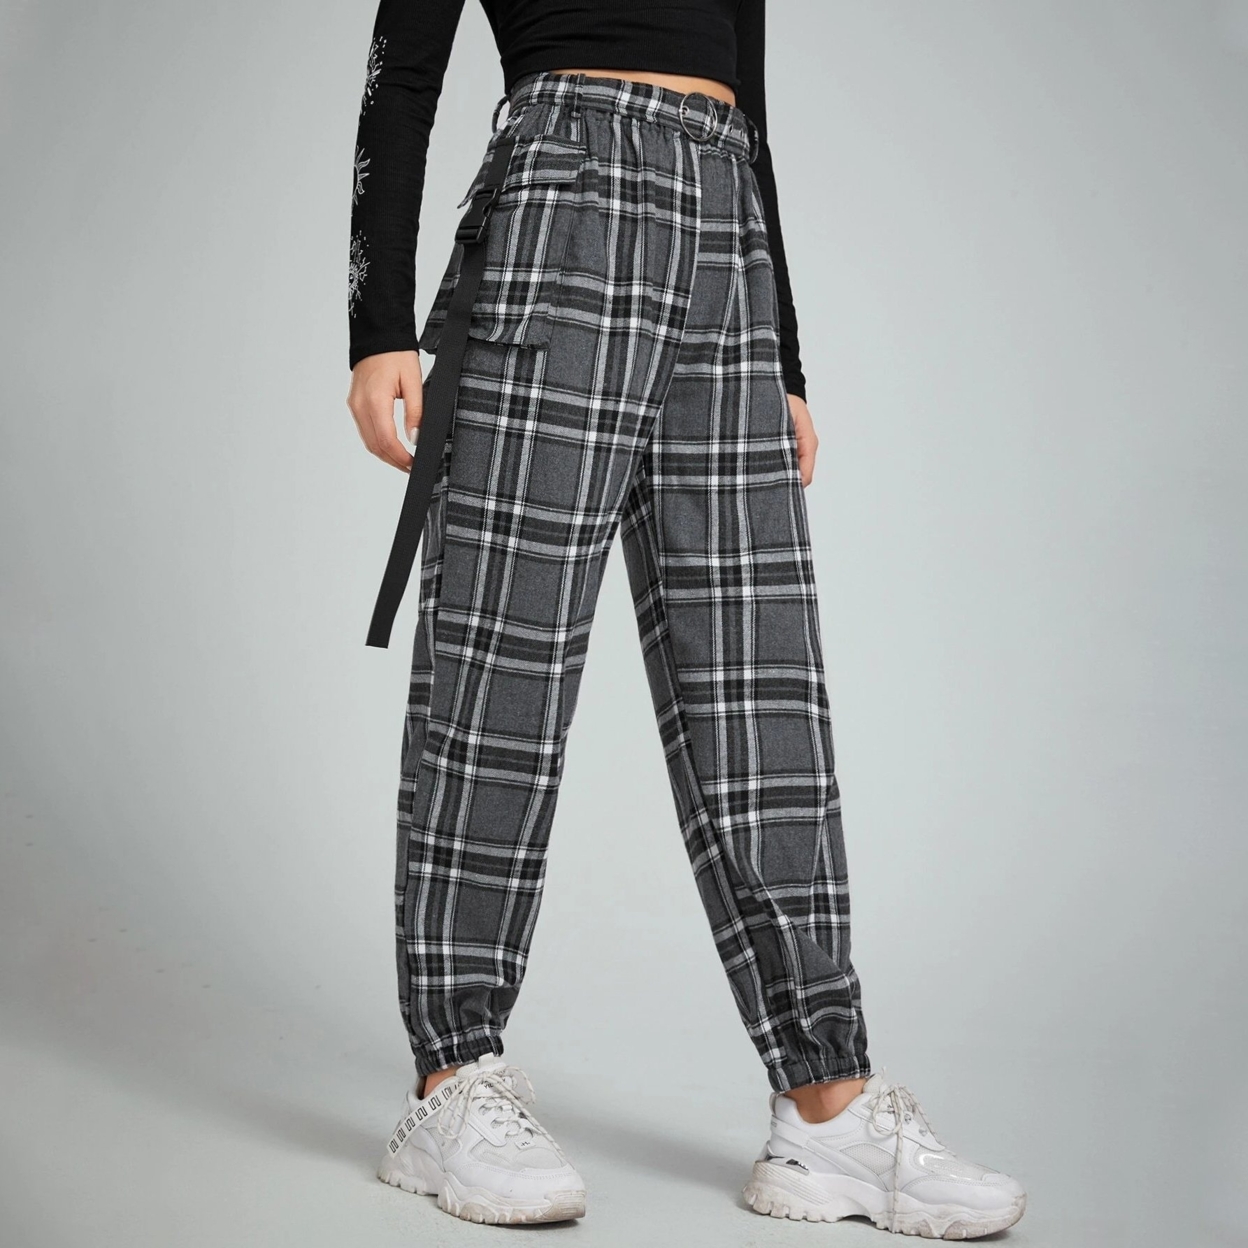 Belted Plaid Joggers - Xl